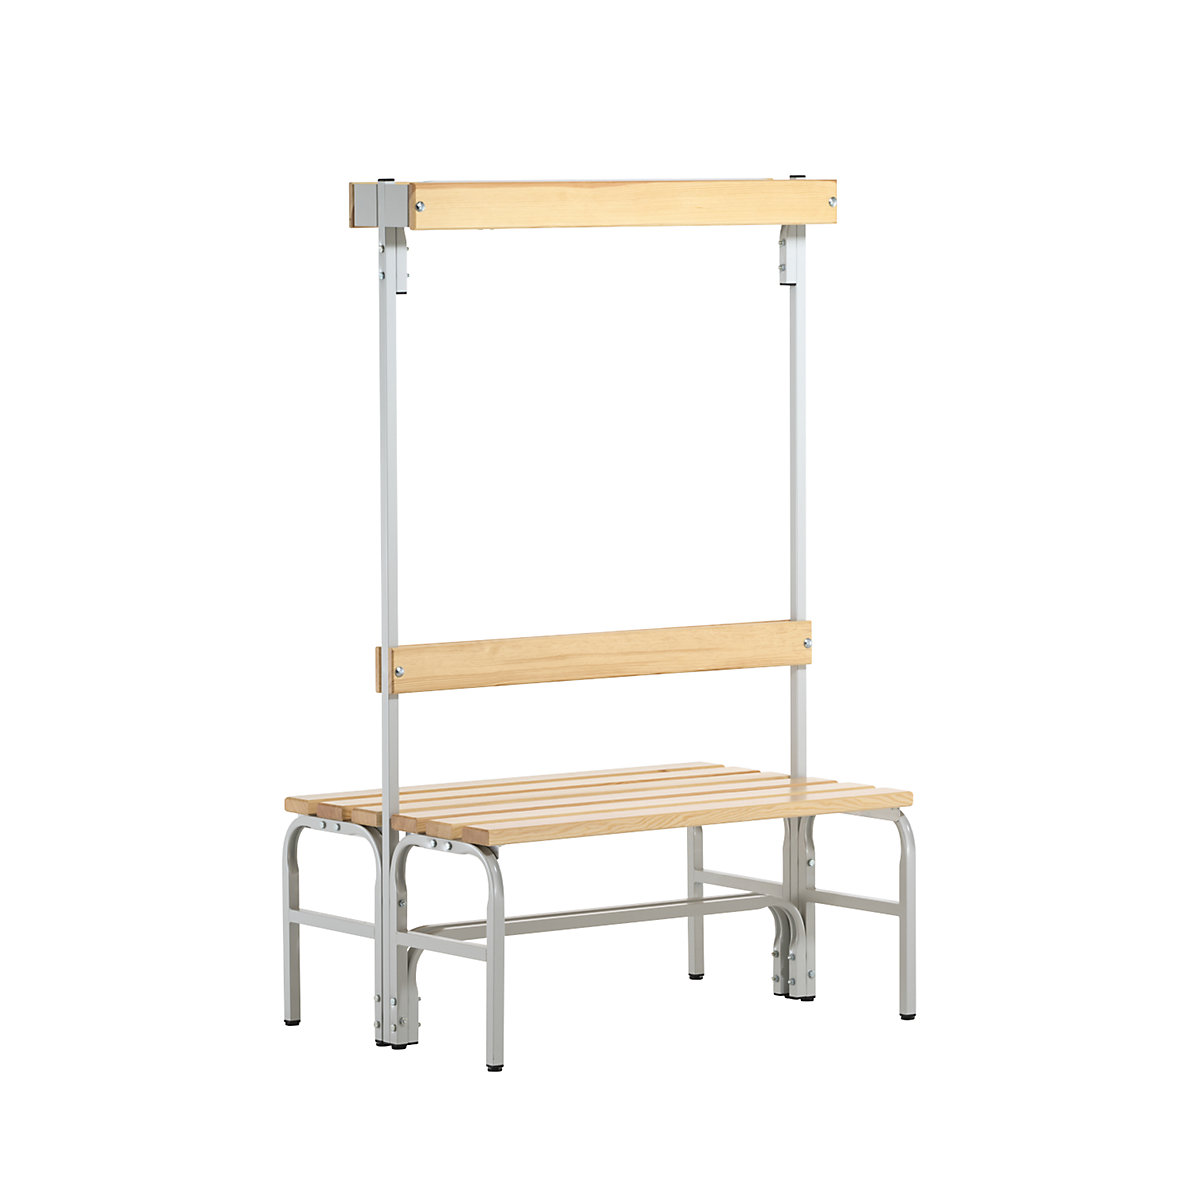 Sypro – Cloakroom bench with hook strips, double-sided, 6 hooks, 1015 mm, light grey